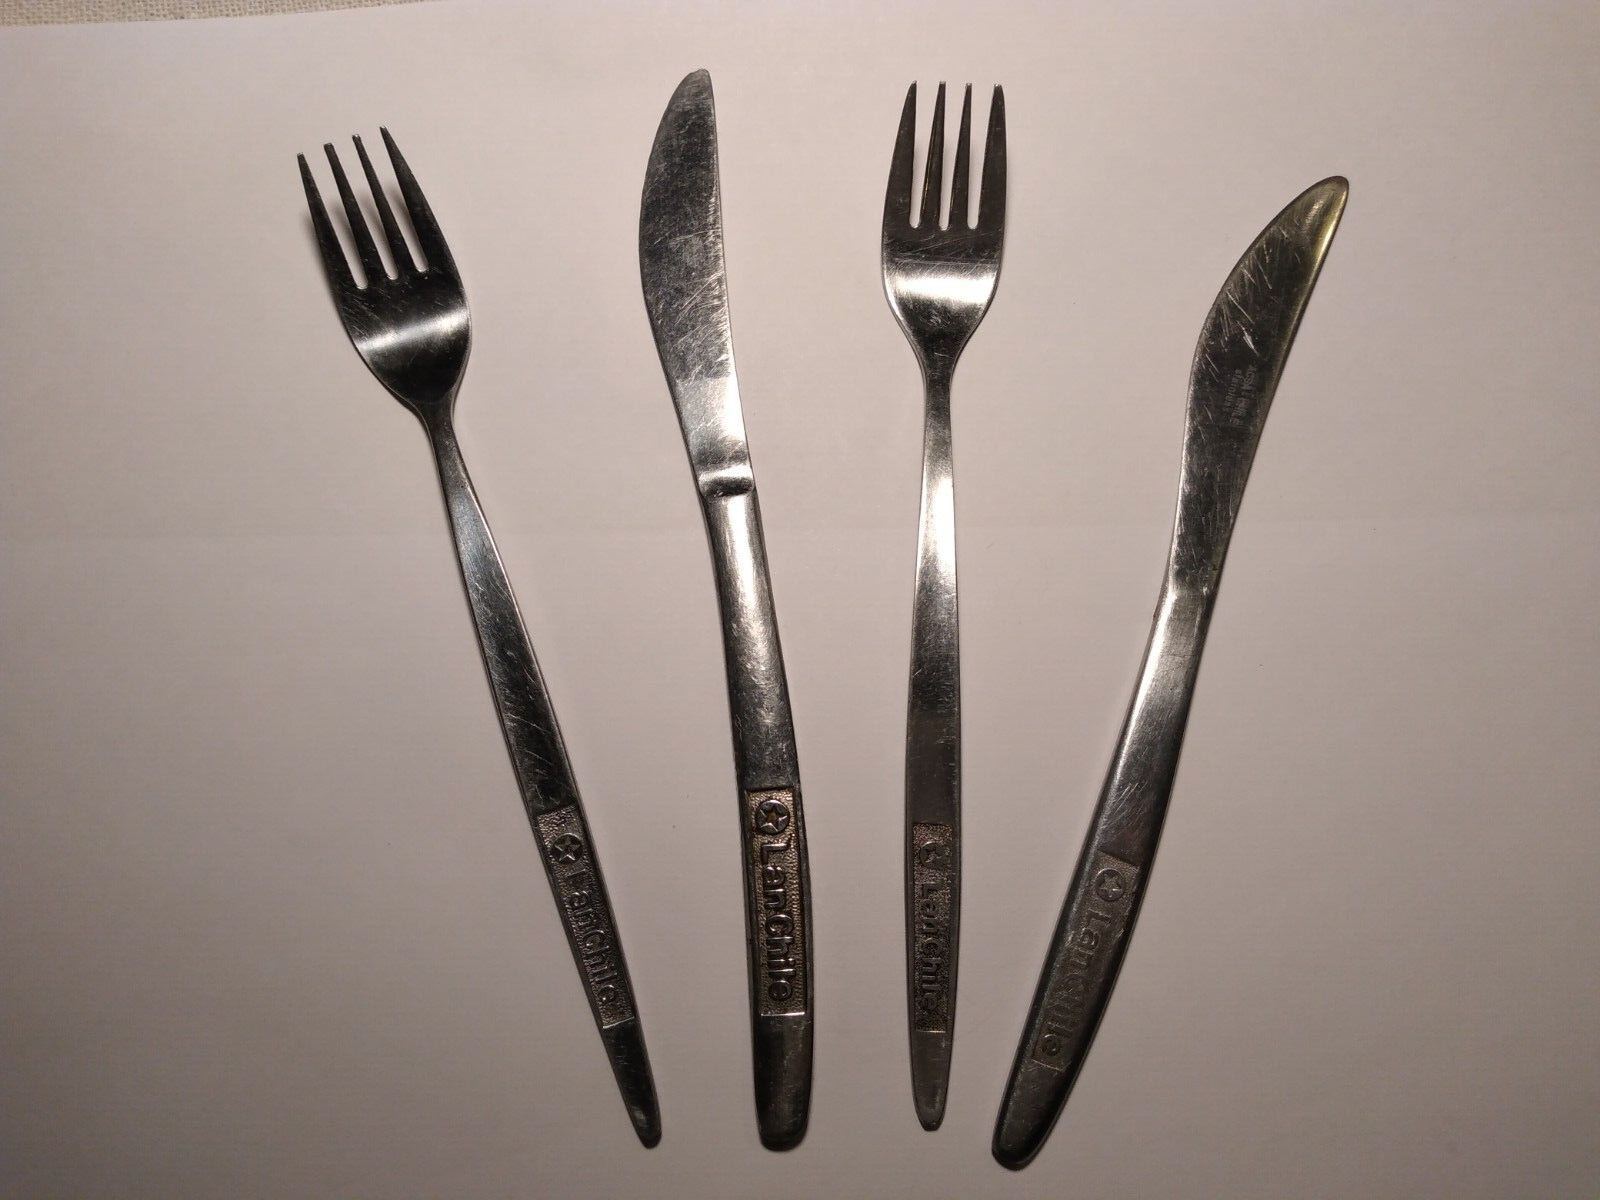 LOT OF 4 OLD LAN CHILE AIRLINES FORKS AND KNIVES SILVERWARE